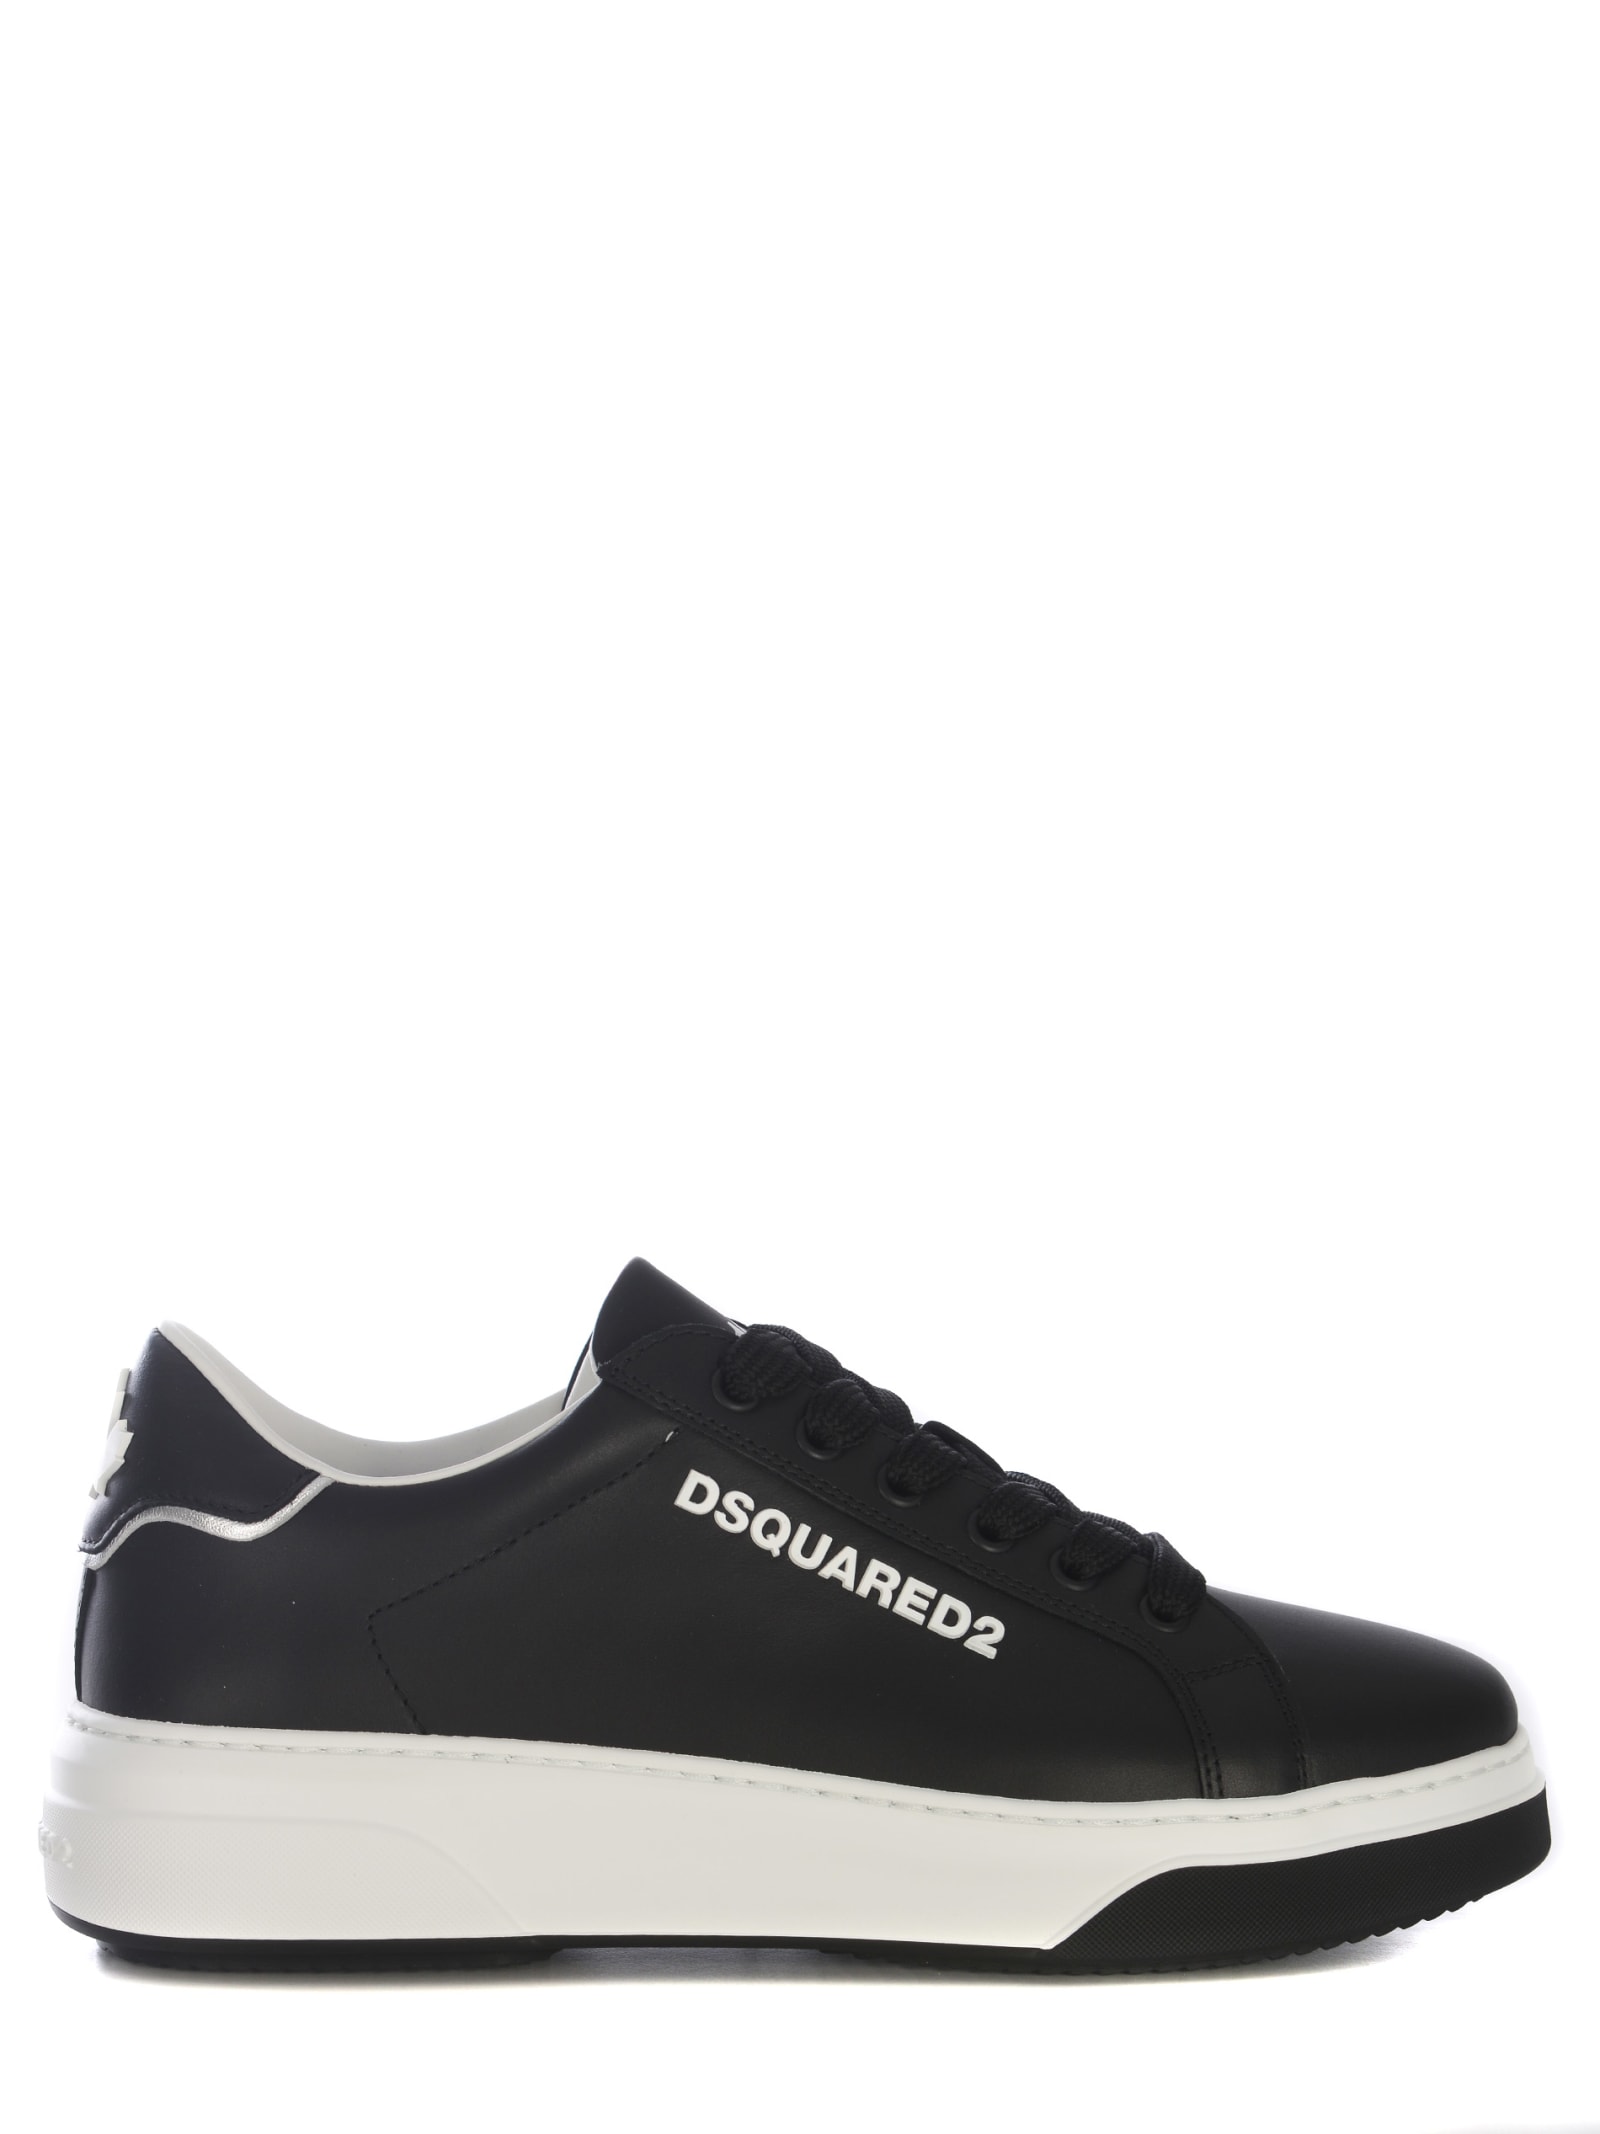 Sneakers Dsquared2 1964 Made Of Leather